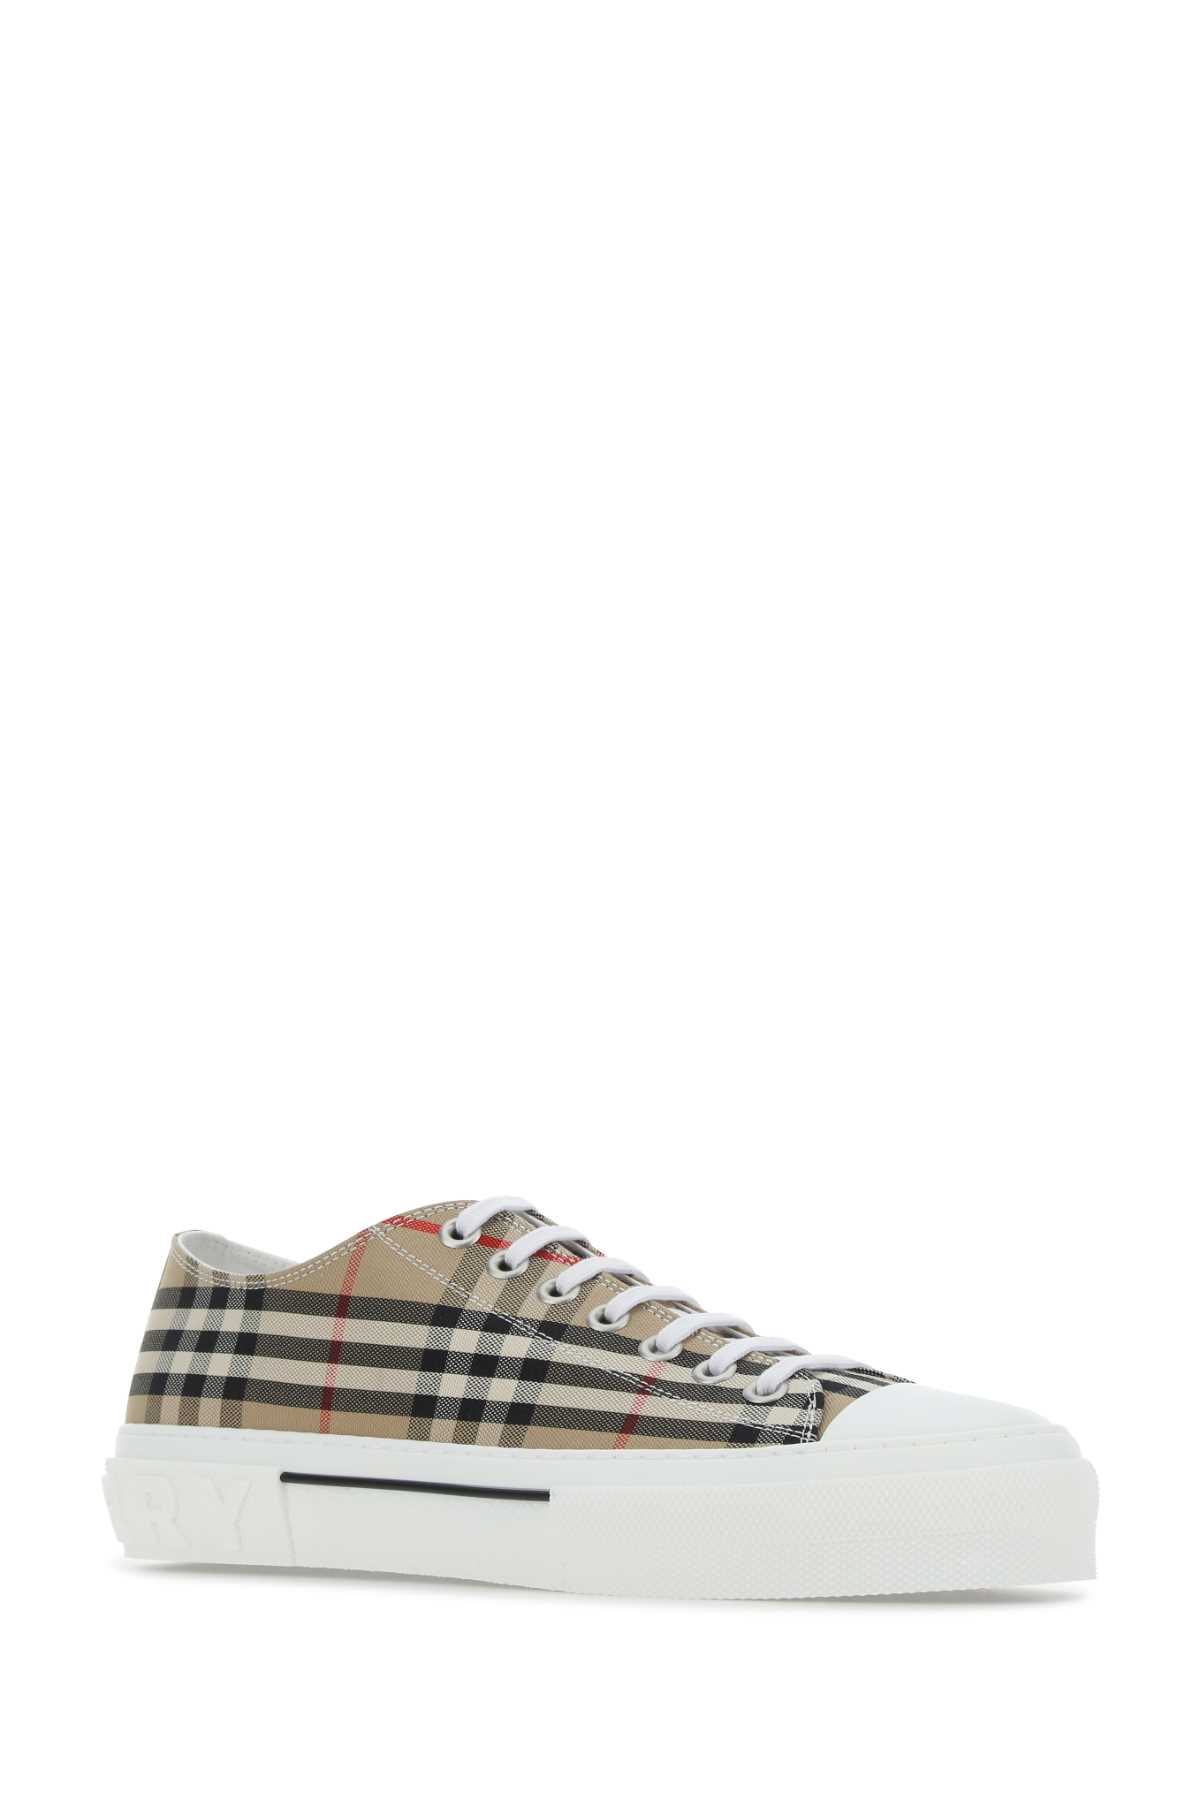 Burberry Embroidered Canvas Sneakers In A7028